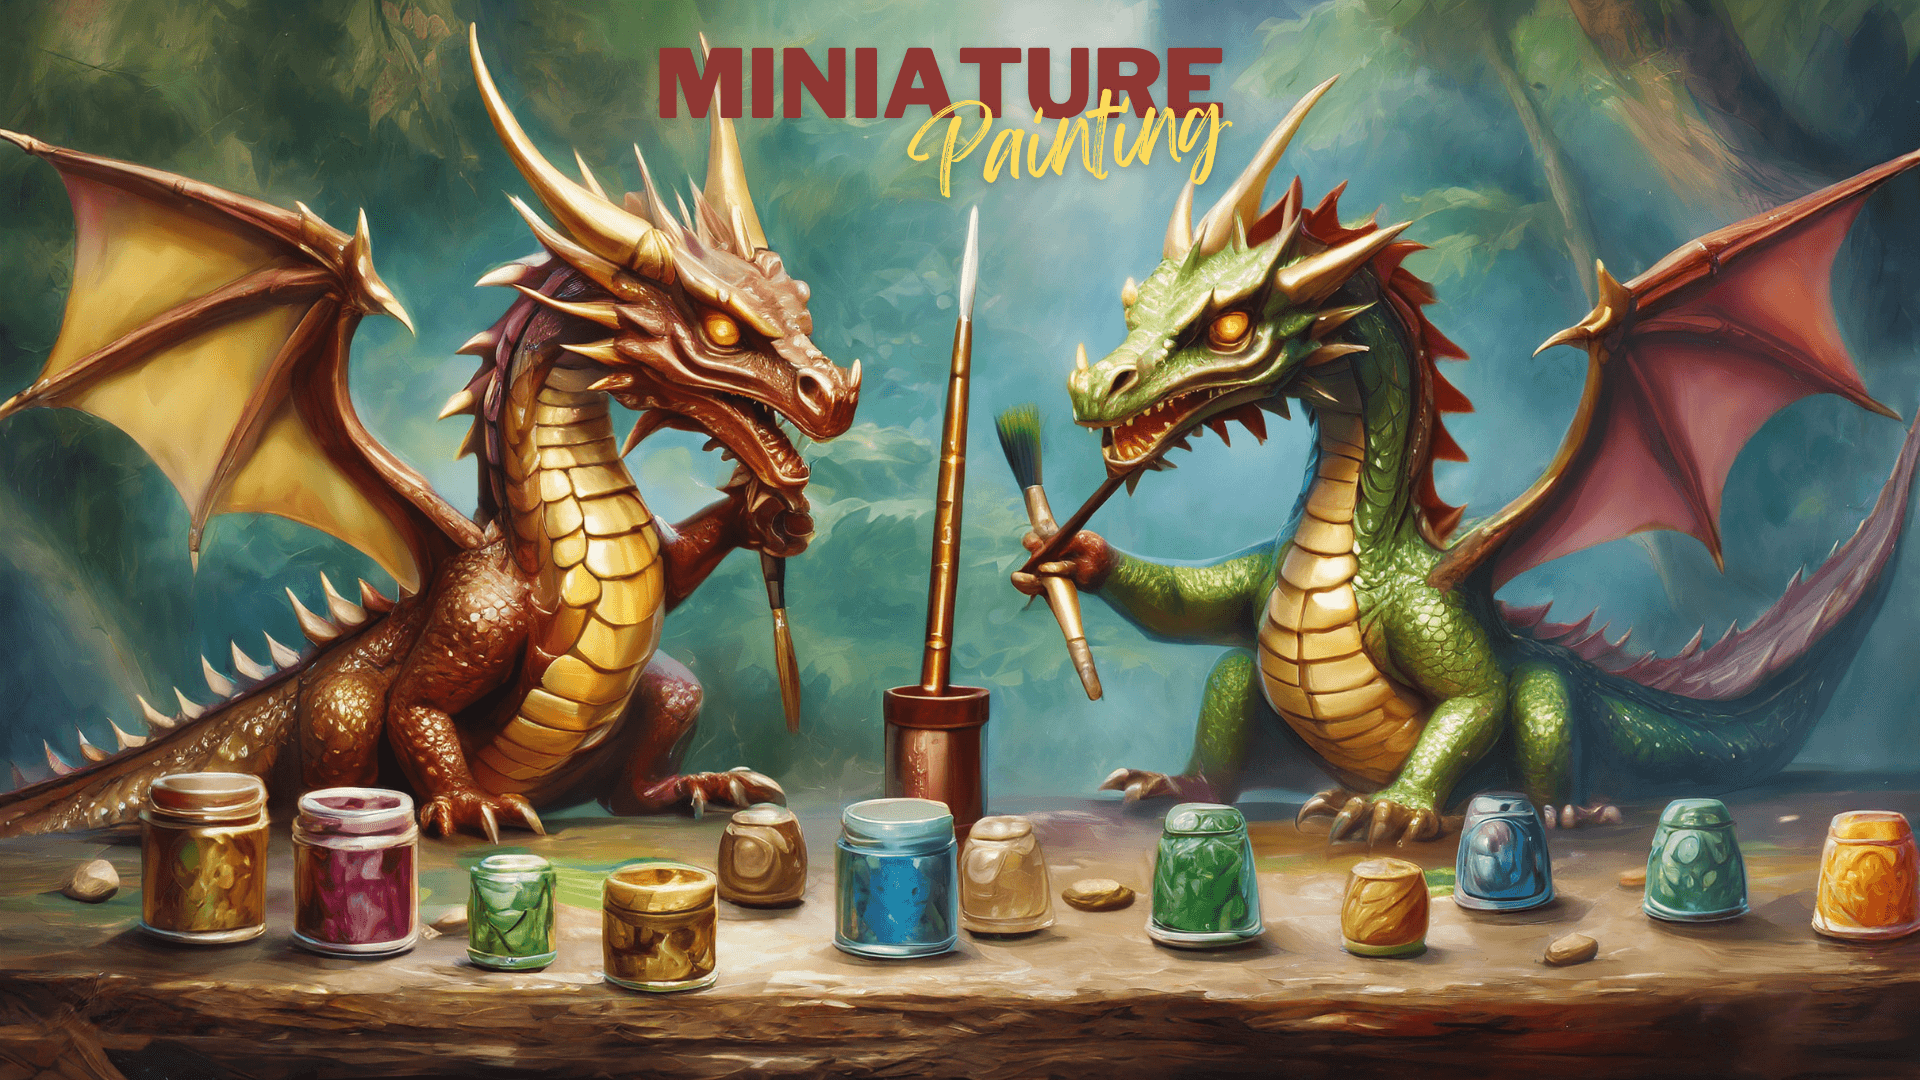 Dragons painting miniatures